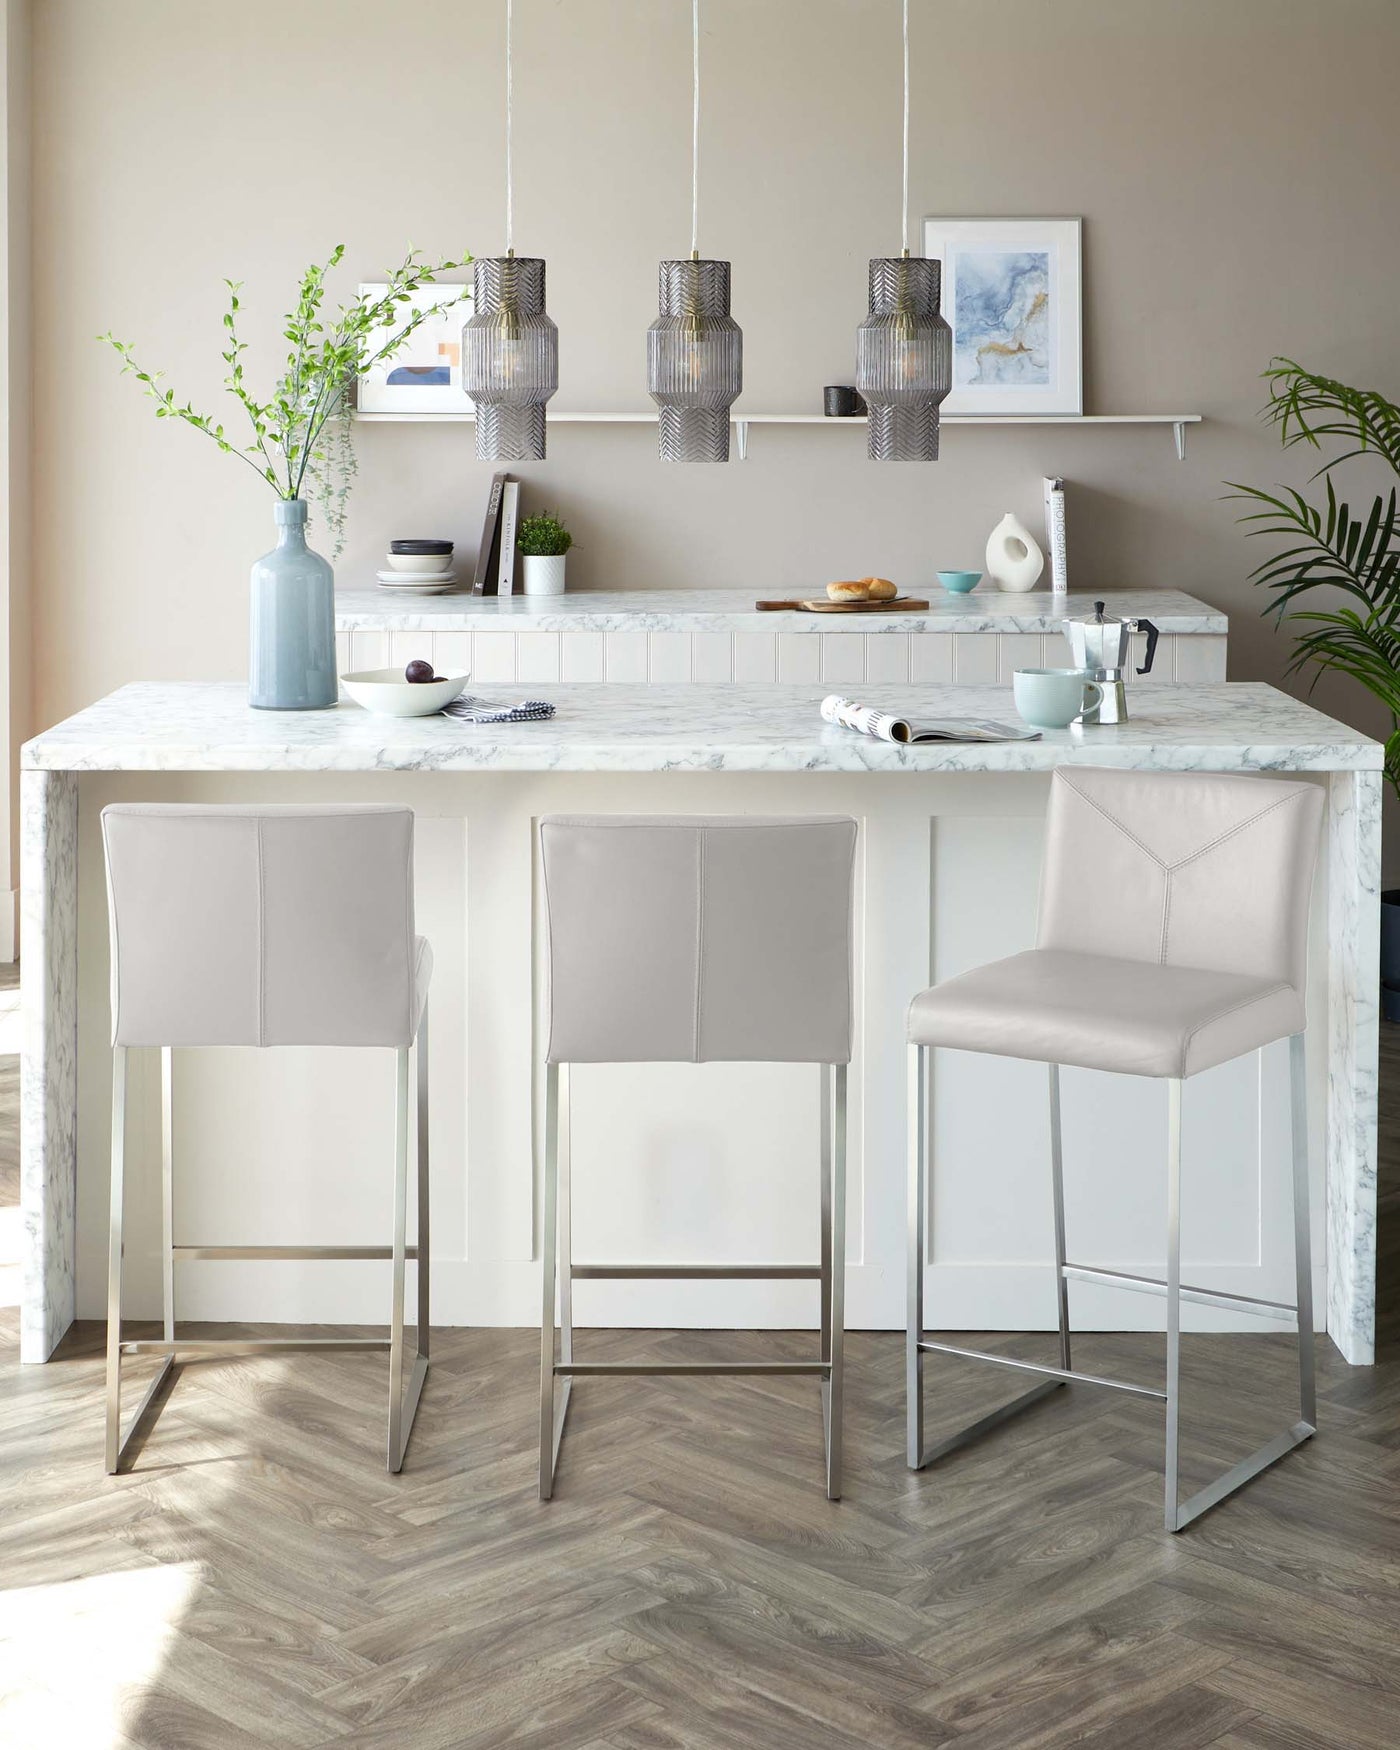 Three modern light grey upholstered bar stools with sleek, silver metal legs, positioned at a white marble-topped kitchen island.